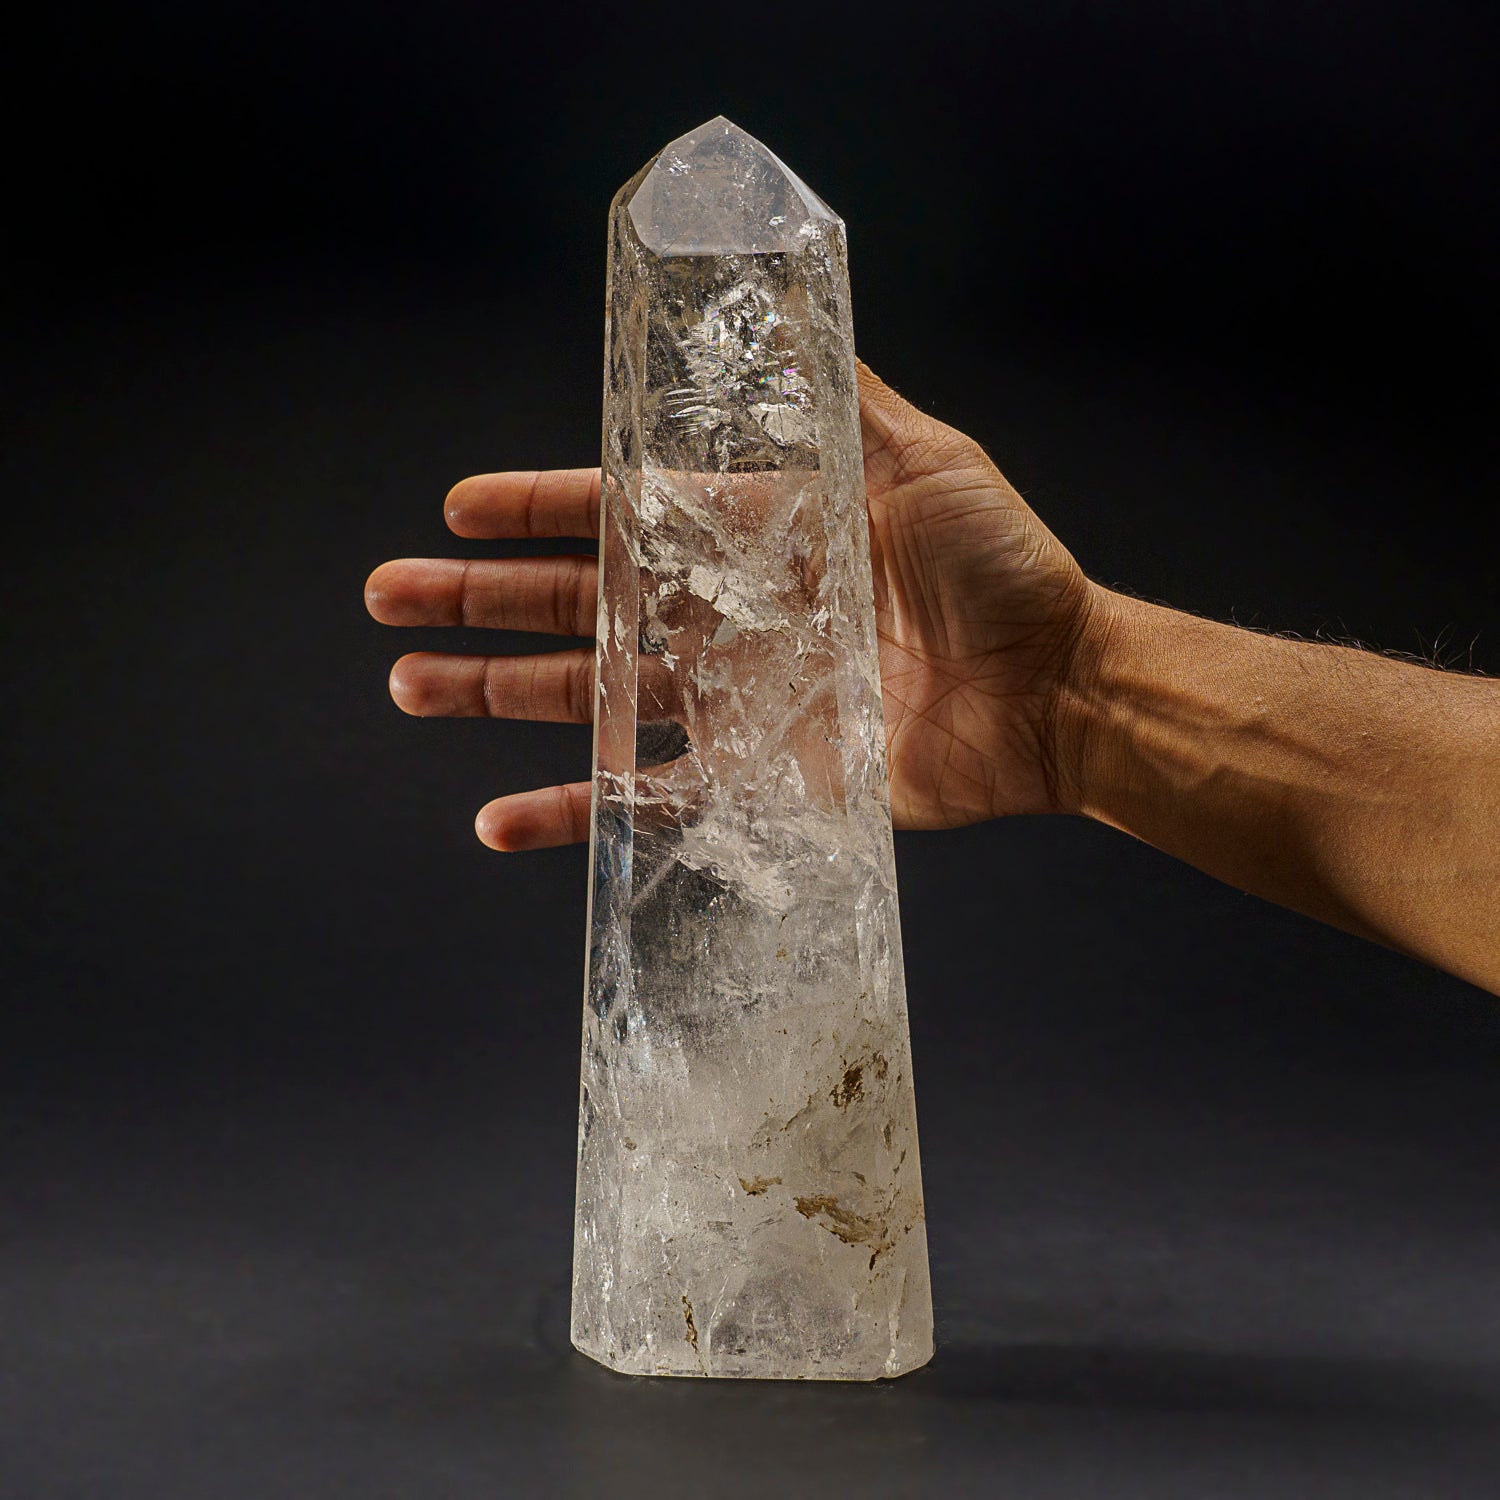 Genuine Polished Clear Quartz Point From Brazil (4 lbs)